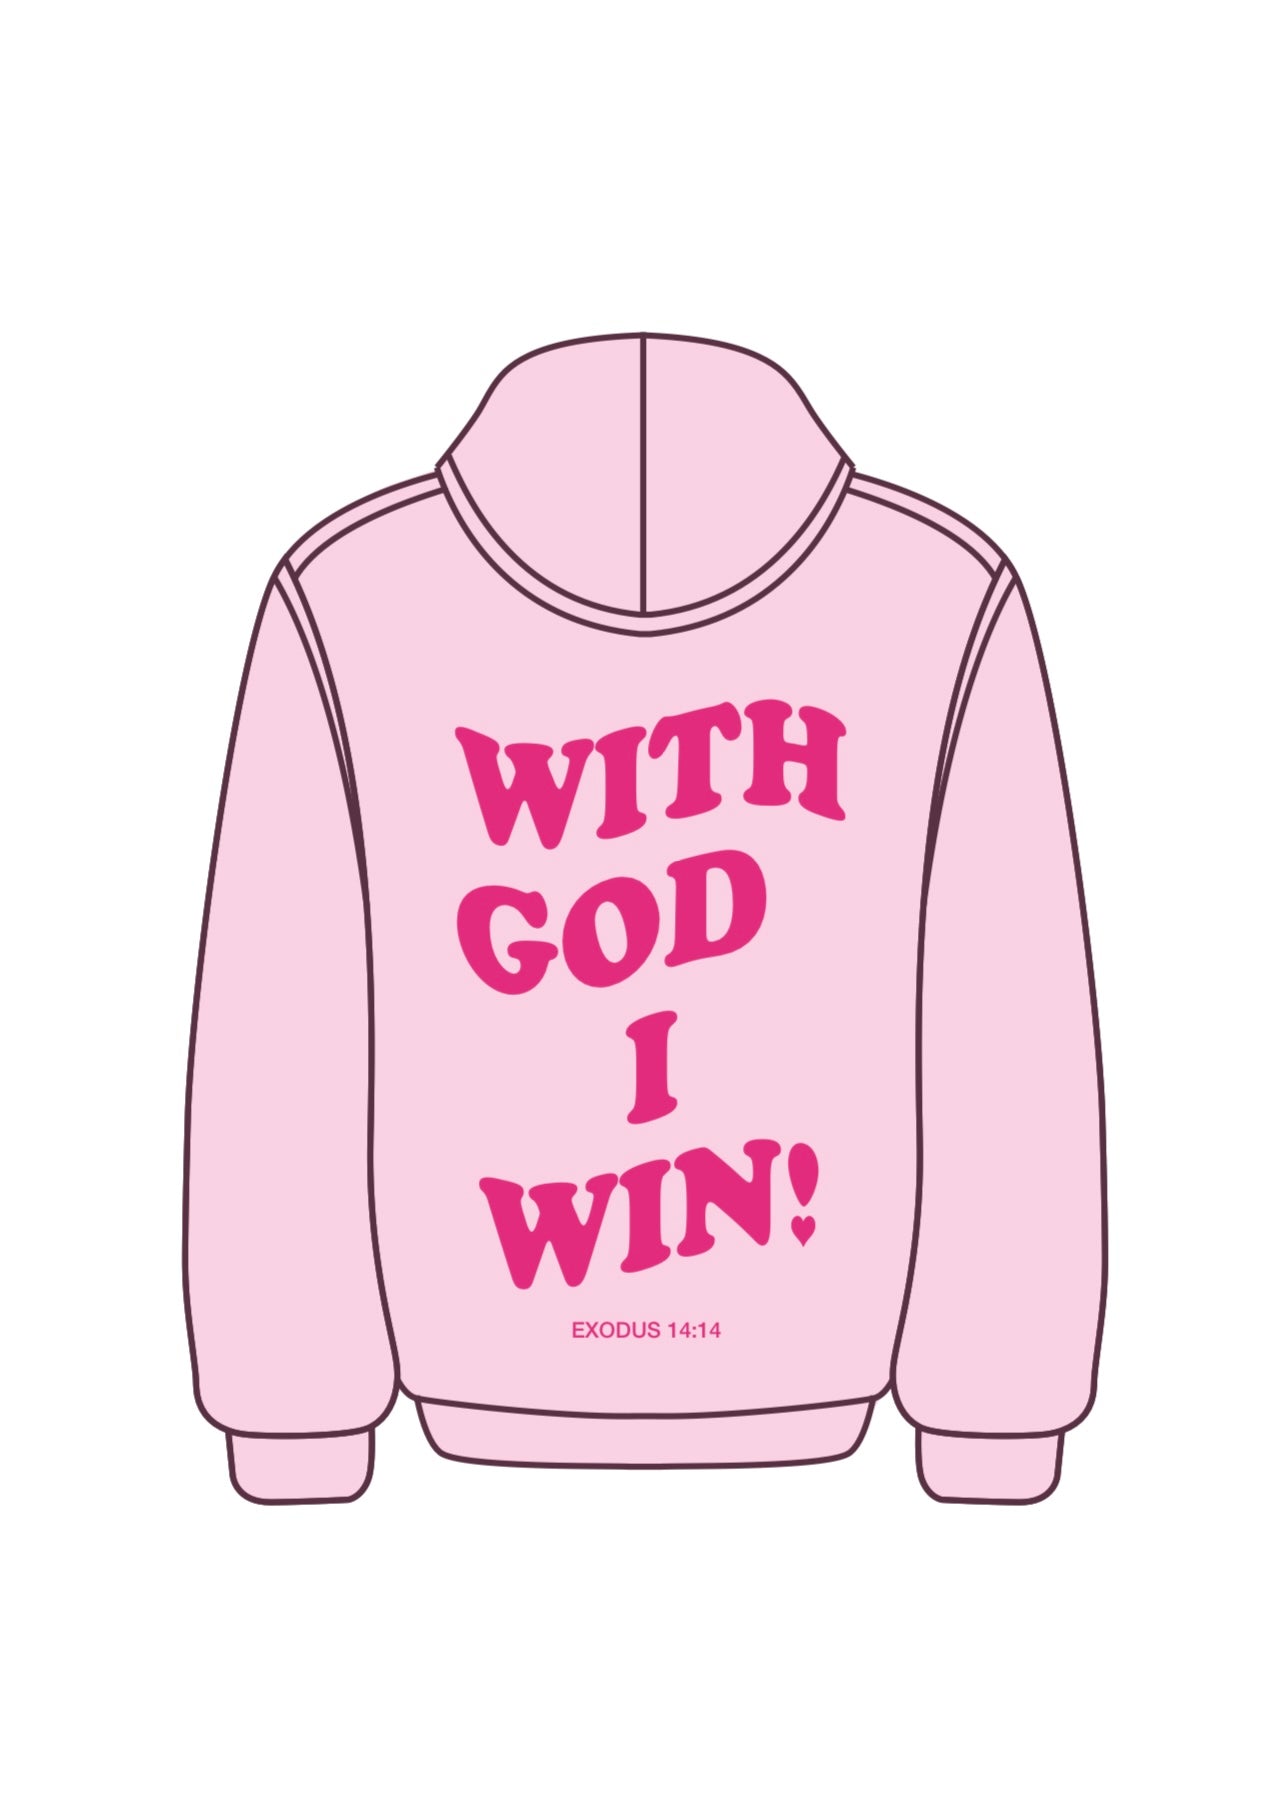 VDAY EDITION WGIW Puff Print Hoodie - With God, I Win! Clothing